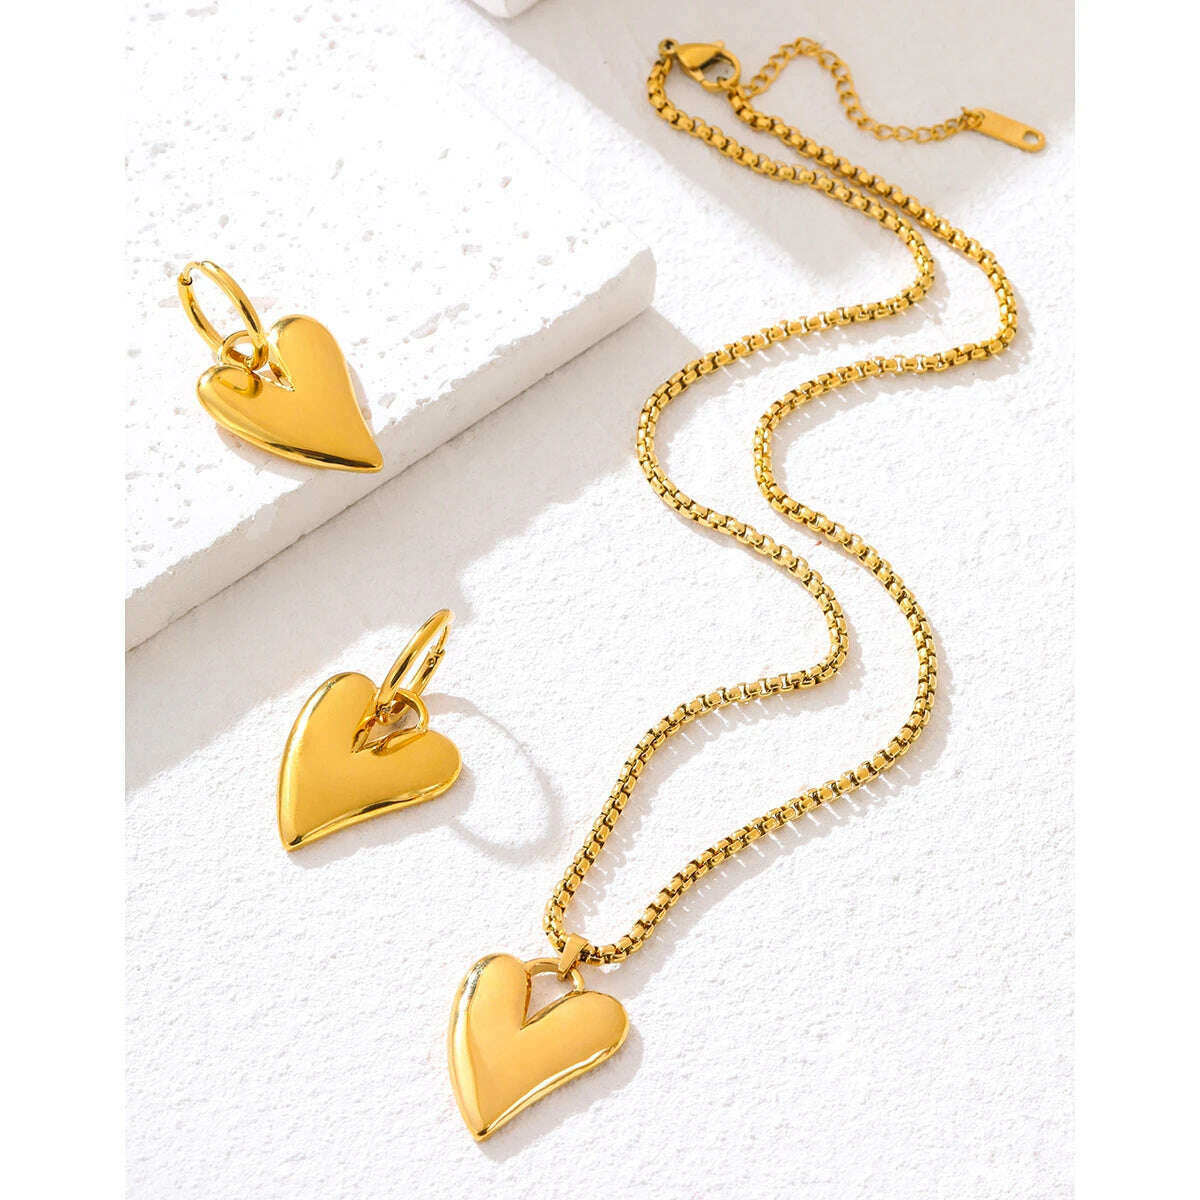 KIMLUD, YACHAN 18K Gold Plated Stainless Steel Irregular Heart Necklace Earrings for Women Glossy Chic Waterproof Jewelry Set, KIMLUD Womens Clothes